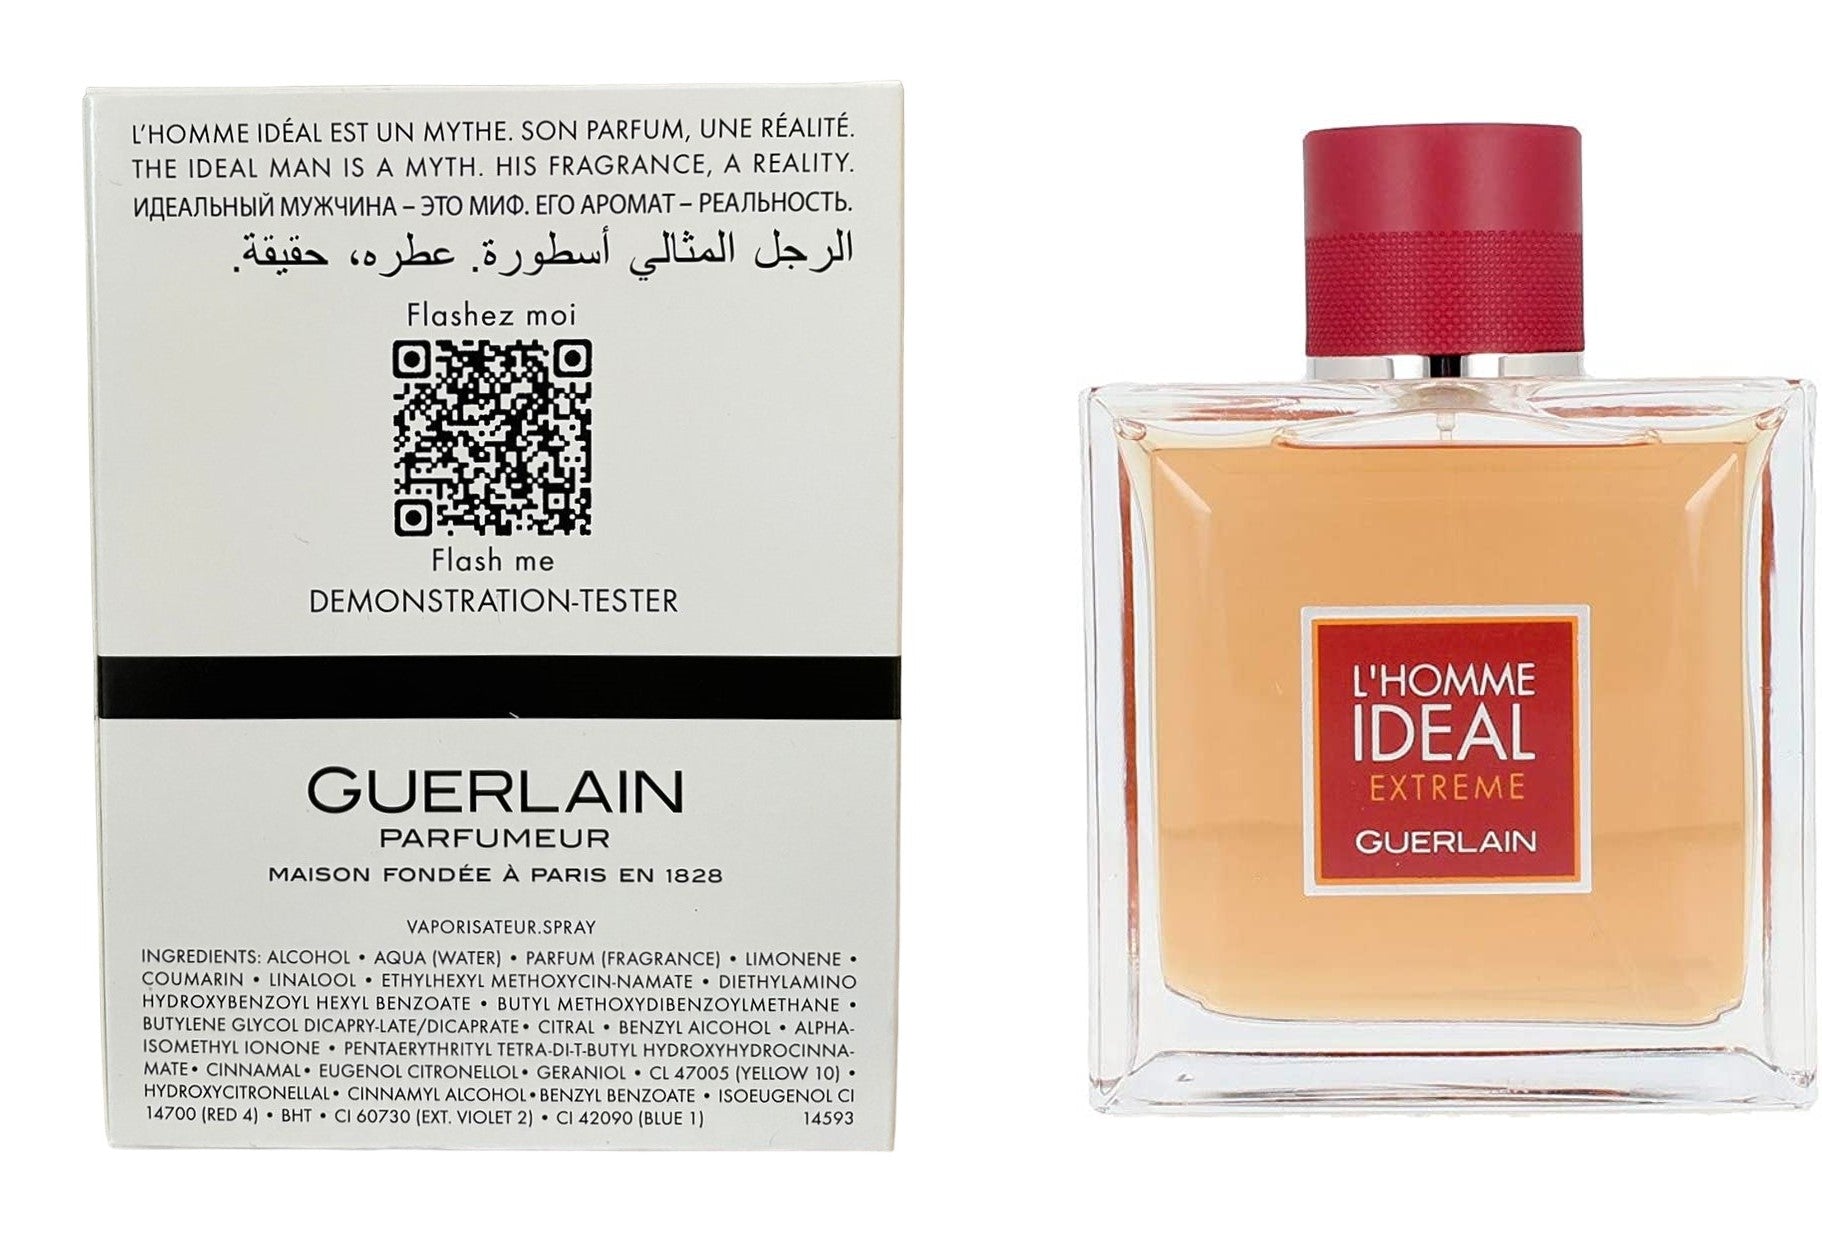 Persolaise Review: L'Homme Ideal from Guerlain (Thierry Wasser